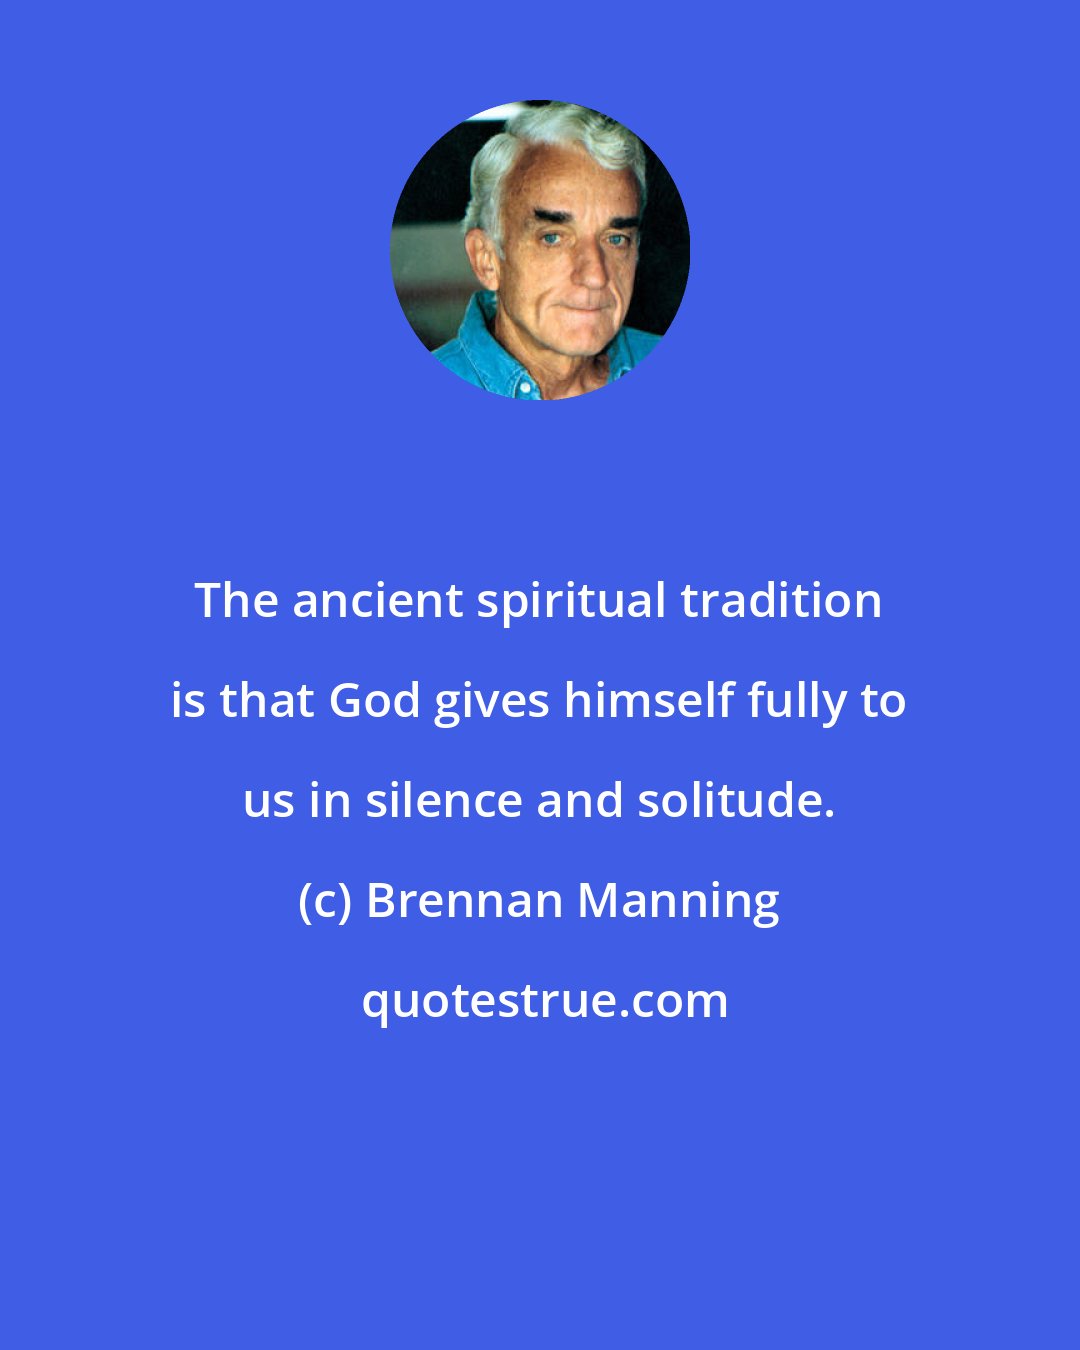 Brennan Manning: The ancient spiritual tradition is that God gives himself fully to us in silence and solitude.